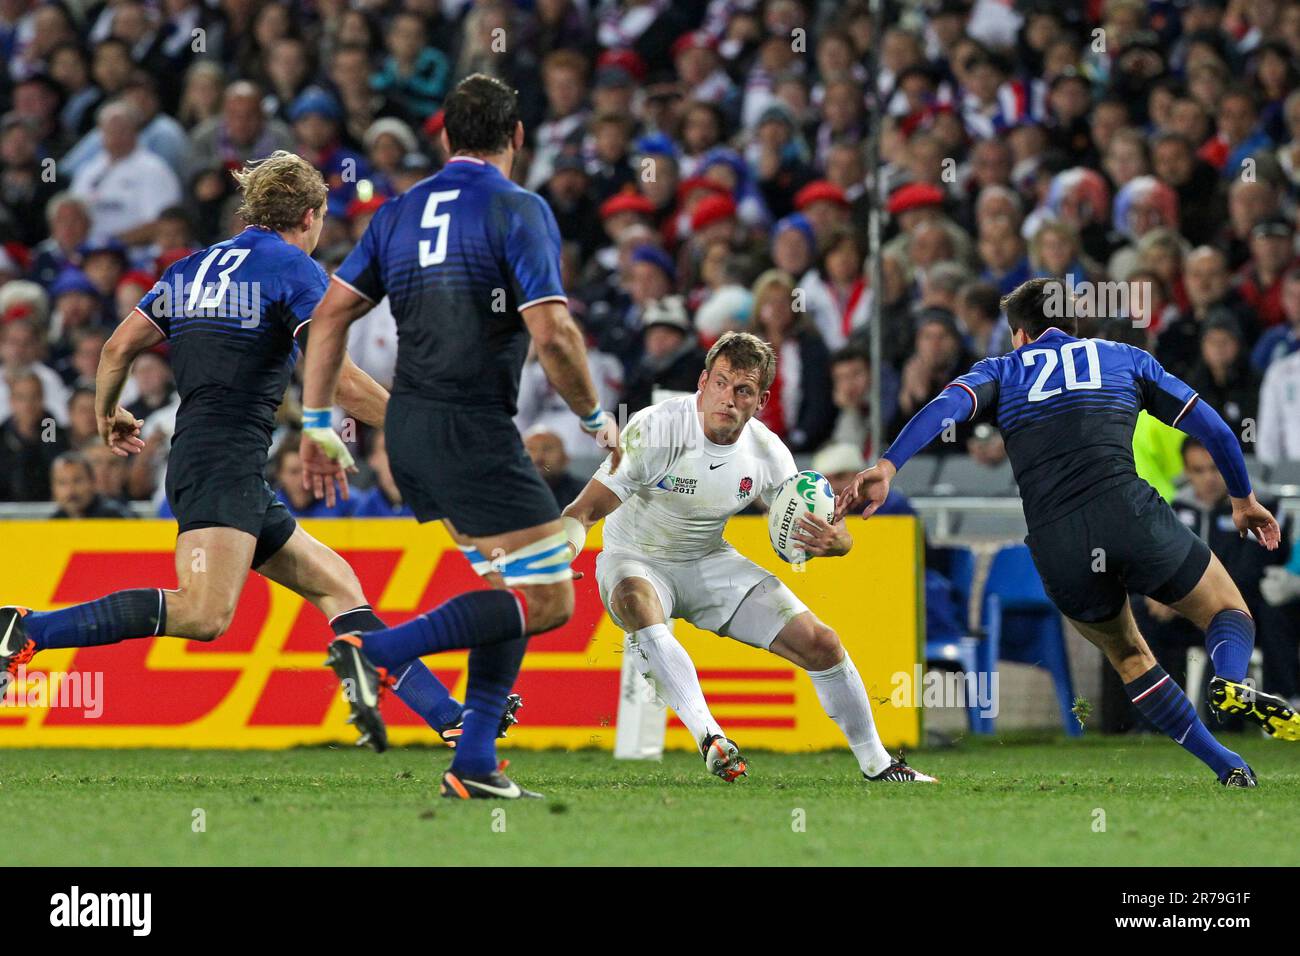 England's Mark Cueto is challenged by France’s Aurélien Rougerie, left, Lionel Nallet and Francois Trinh-Duc during quarter-final 2 match of the Rugby World Cup 2011, Eden Park, Auckland, New Zealand, Saturday, October 08, 2011. Stock Photo